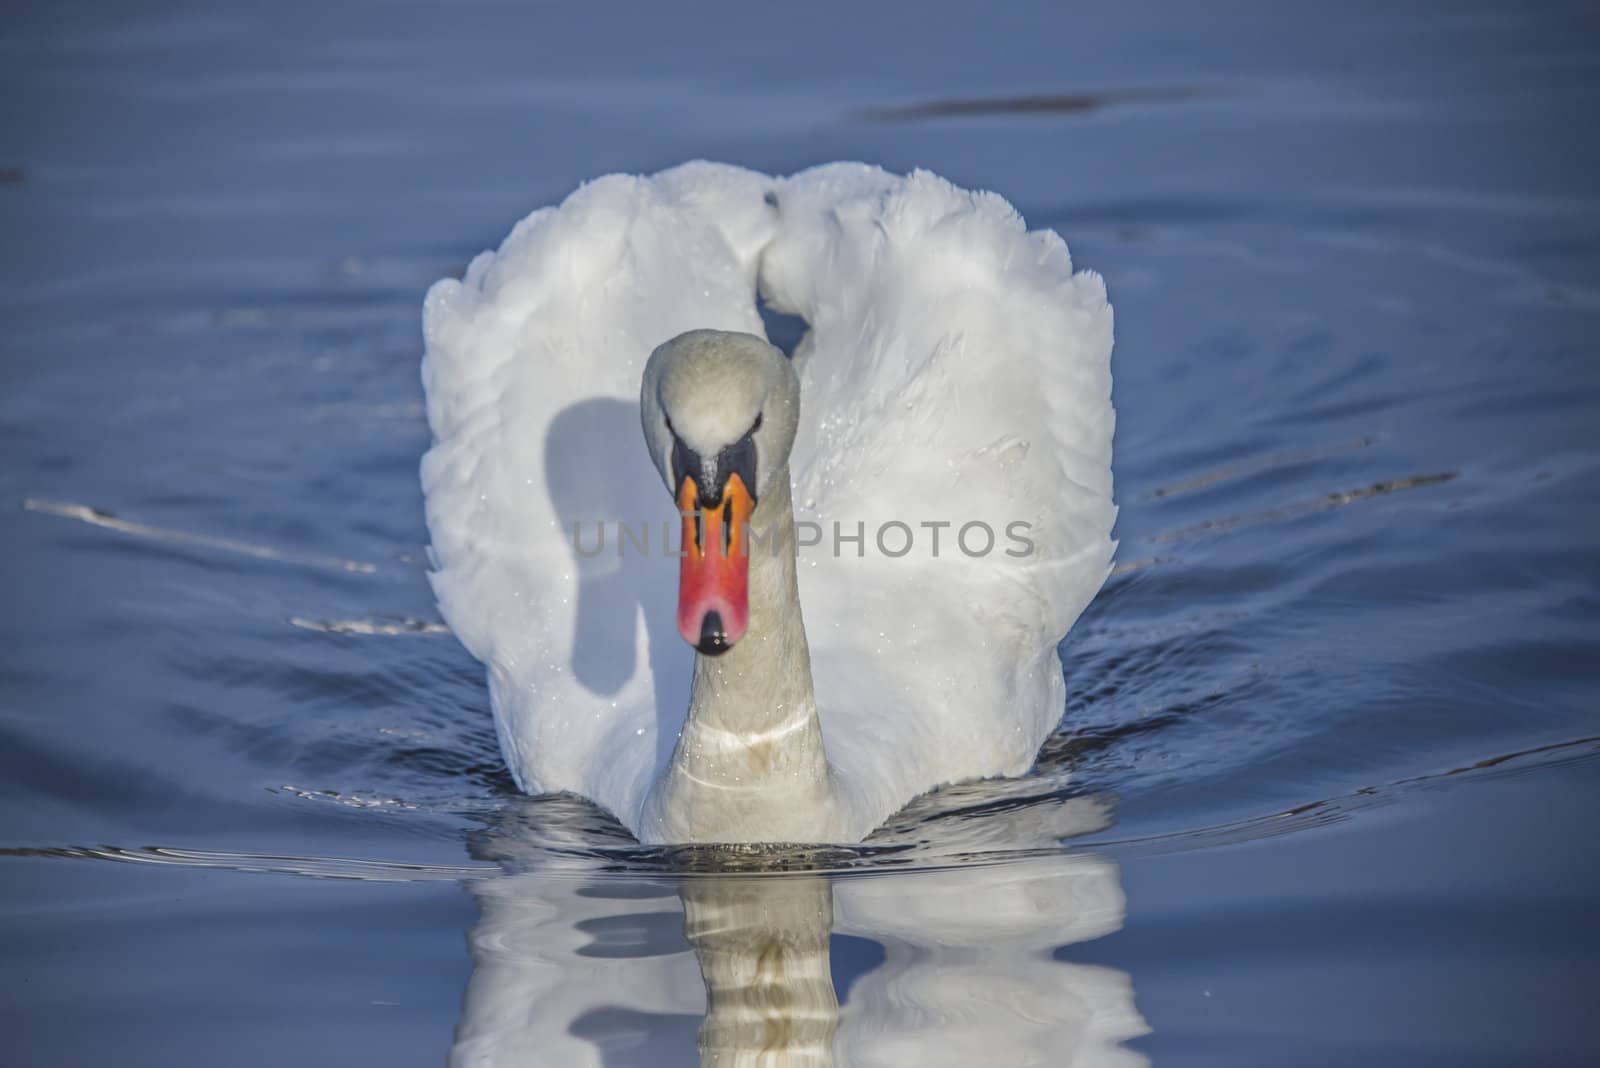 mute swan is a large wetland associated bird belonging to the duck family, the image is shot one february day in 2013 by tista river in Halden.